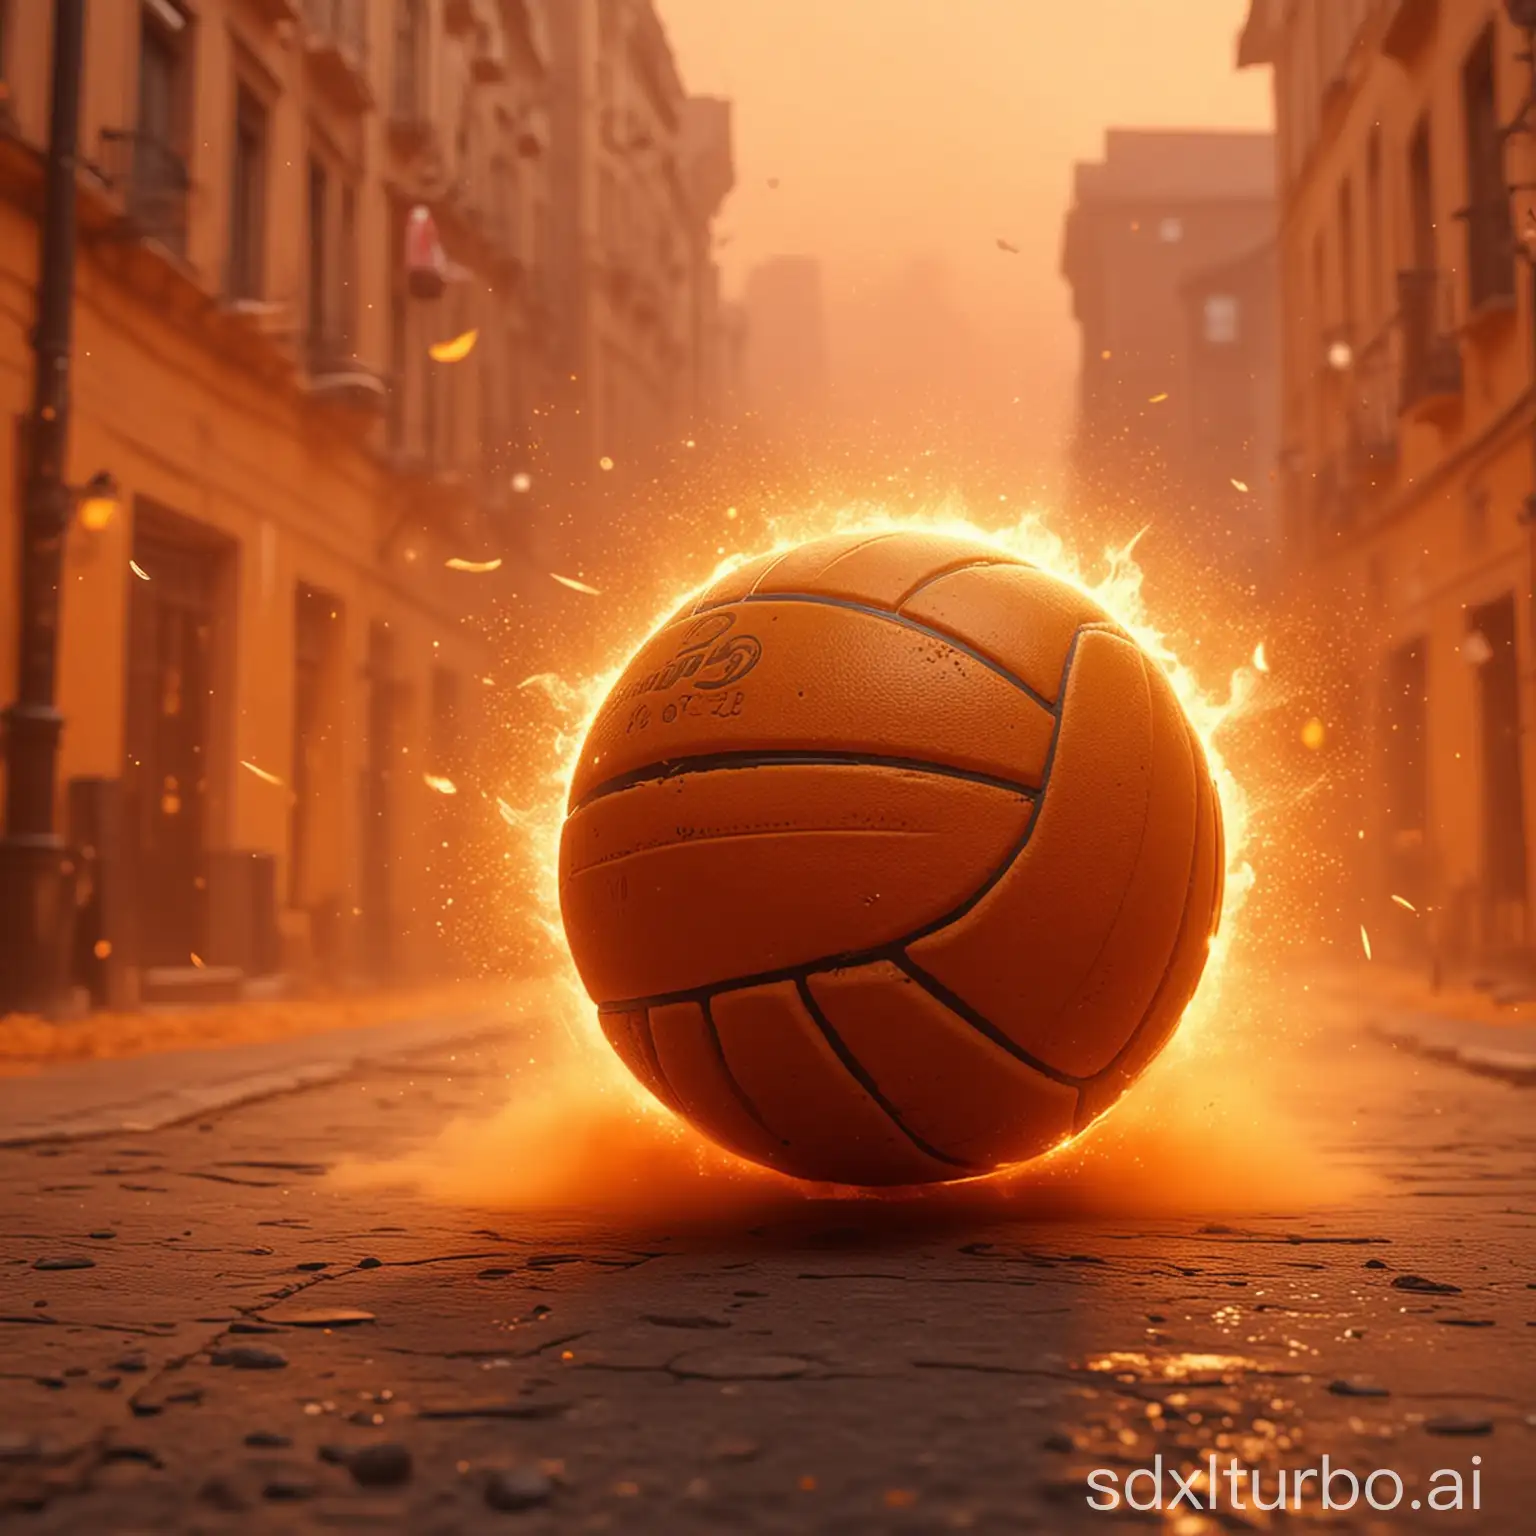 Orange,volleyball theme,orange magic symbols floating in the air,particle effect,surrounded by orange fog,epic atmosphere,on city streets,extremely detailed,professional,4k,8k lines,depth of field,